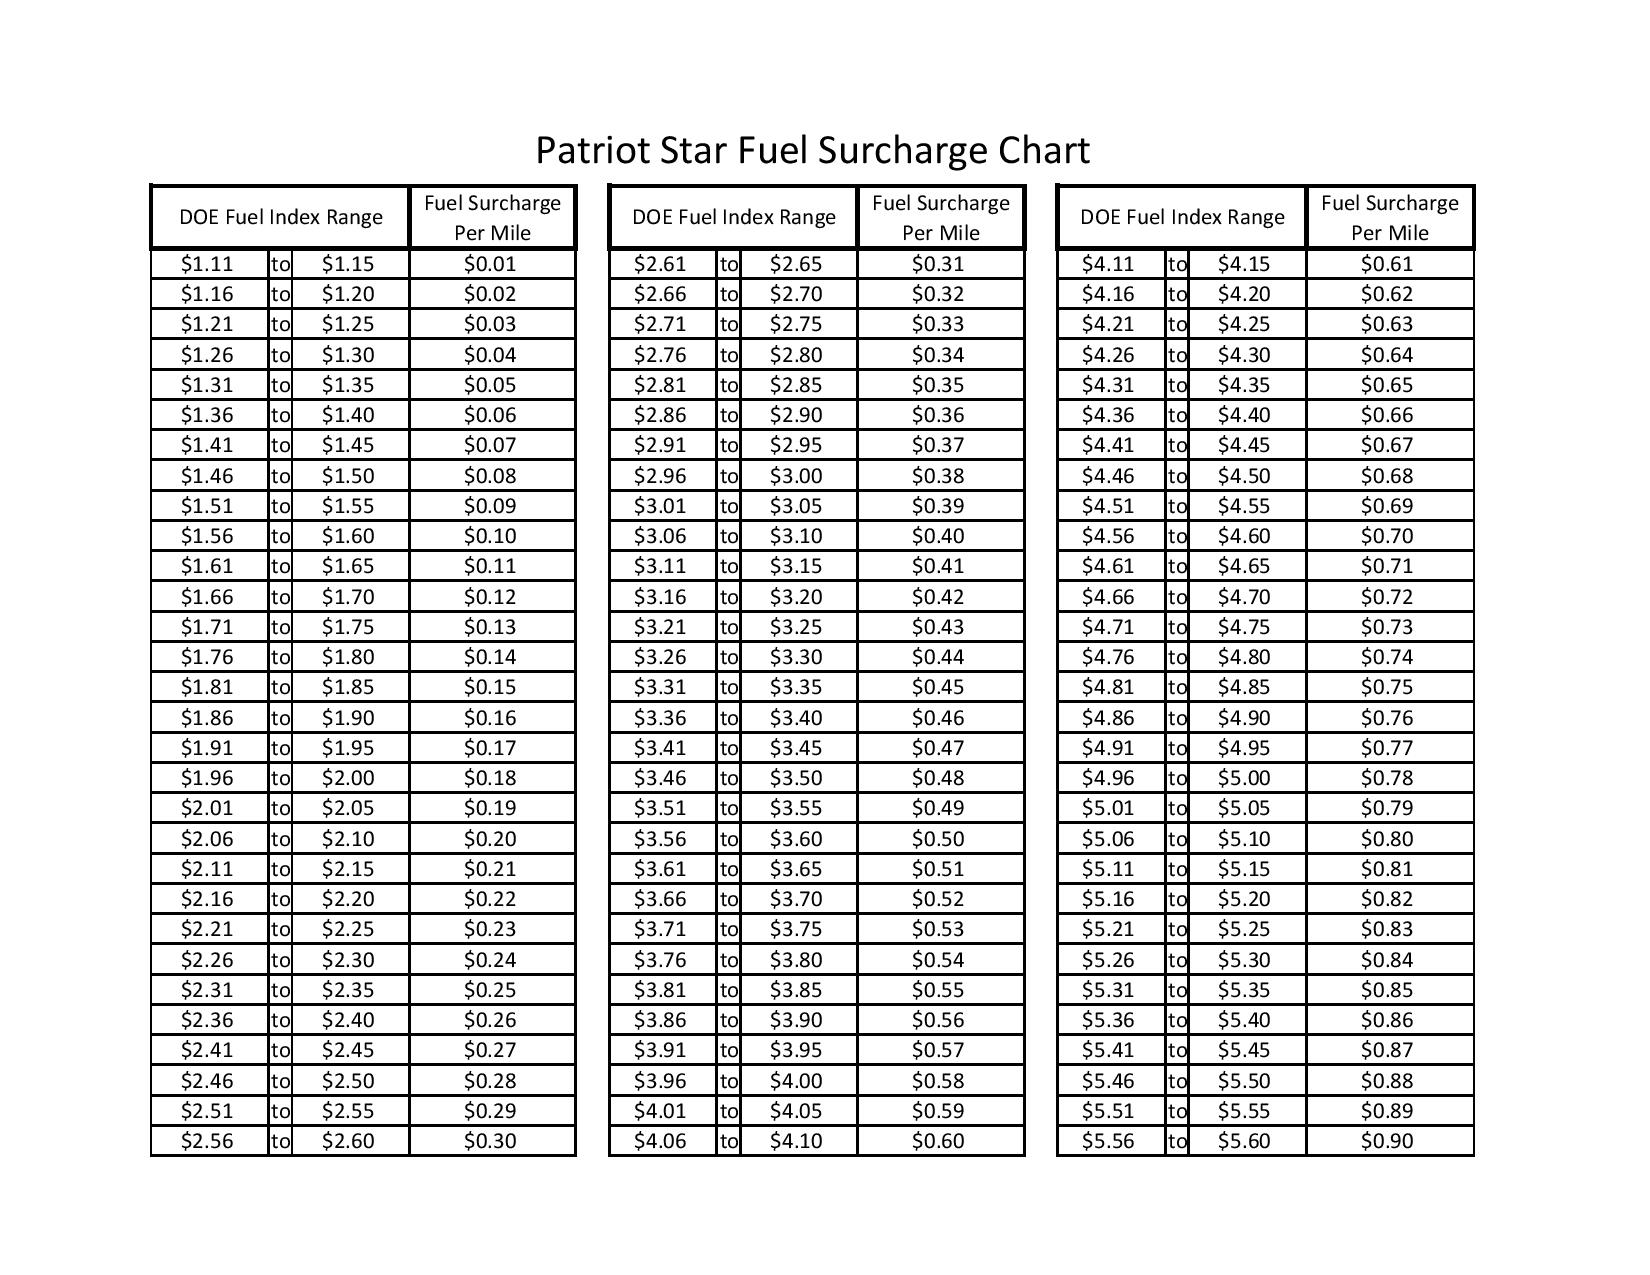 Fuel Surcharge Chart 2016